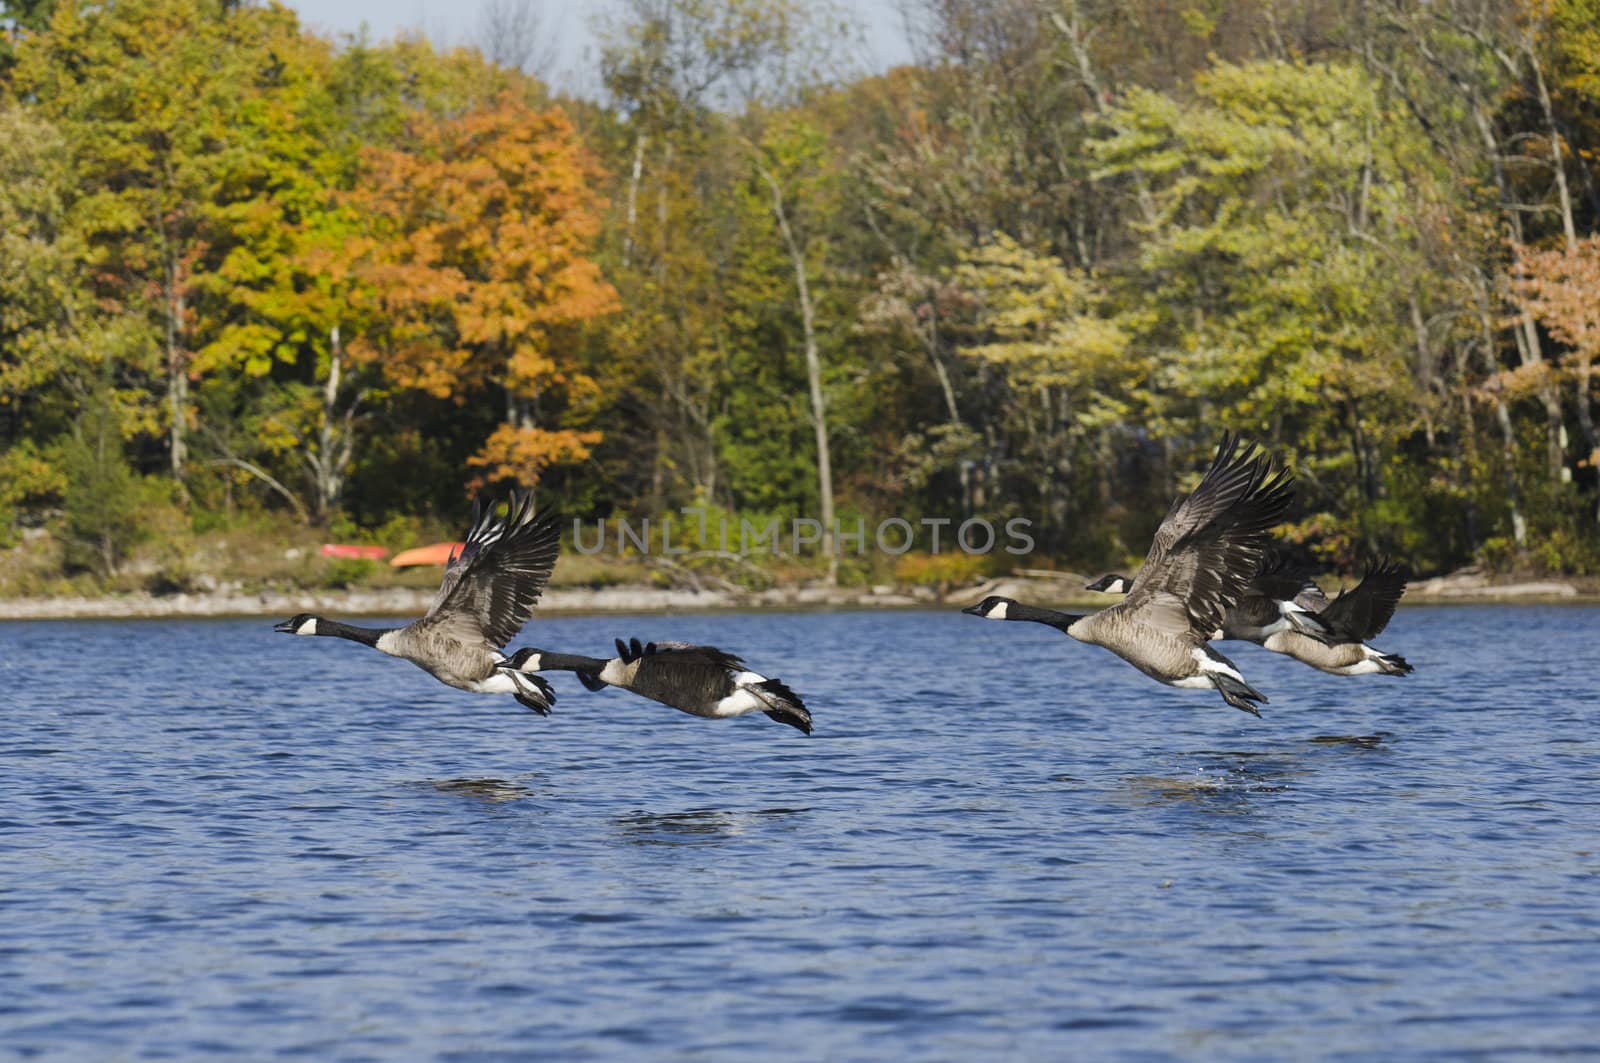 Geese Flying Above the Water by Gordo25